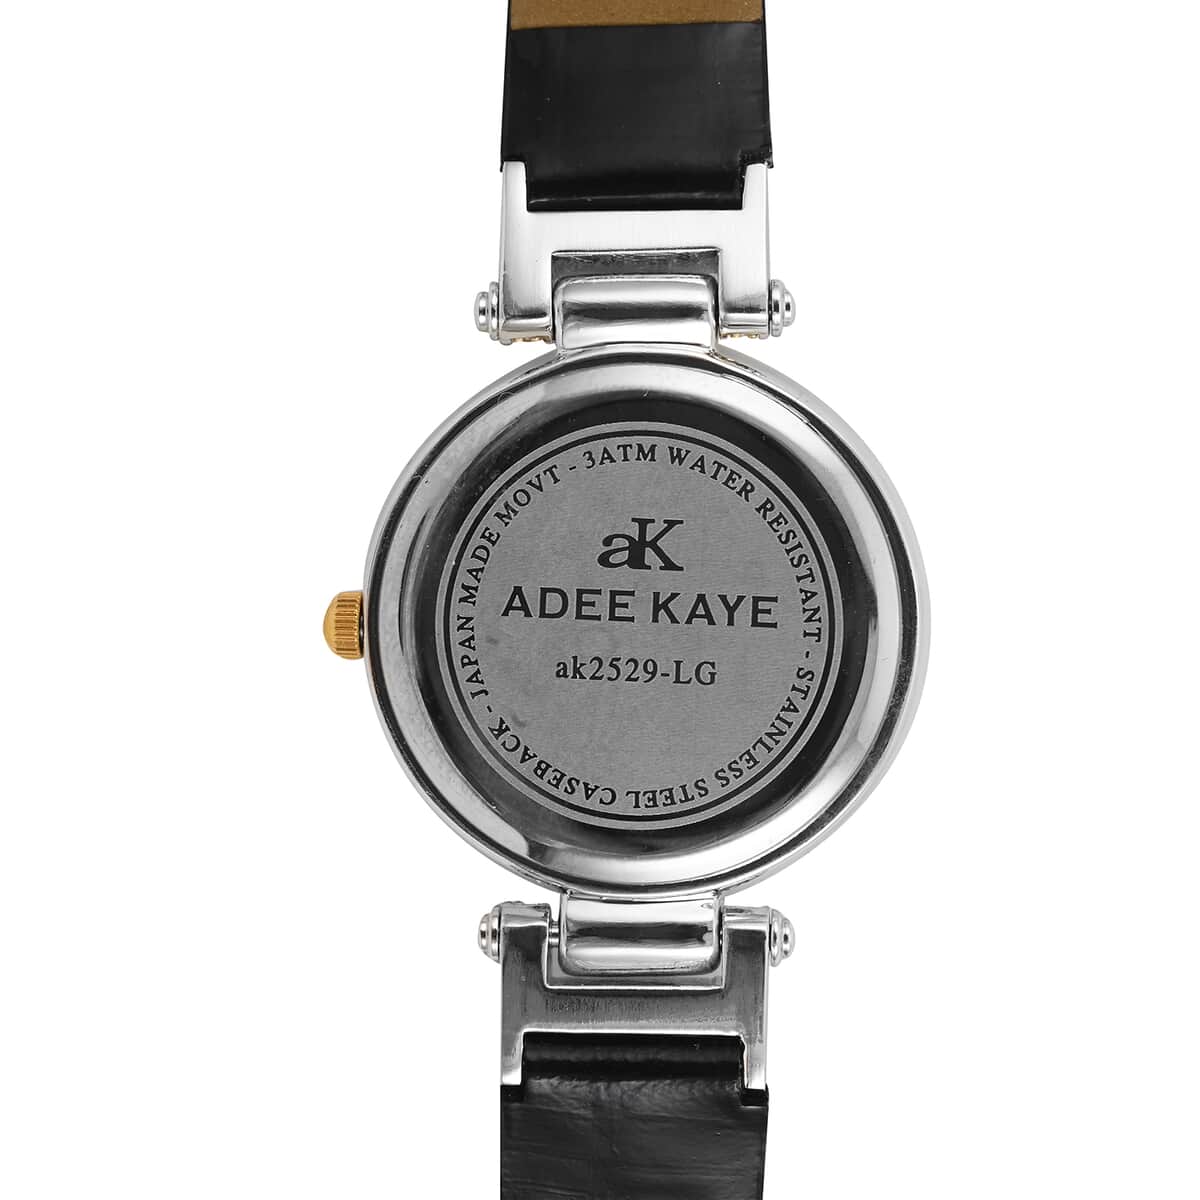 ADEE KAYE Austrian Crystal Japan Quartz Movement Goldtone Dial Watch in Black Leather Band , Designer Leather Watch , Analog Luxury Wristwatch image number 4